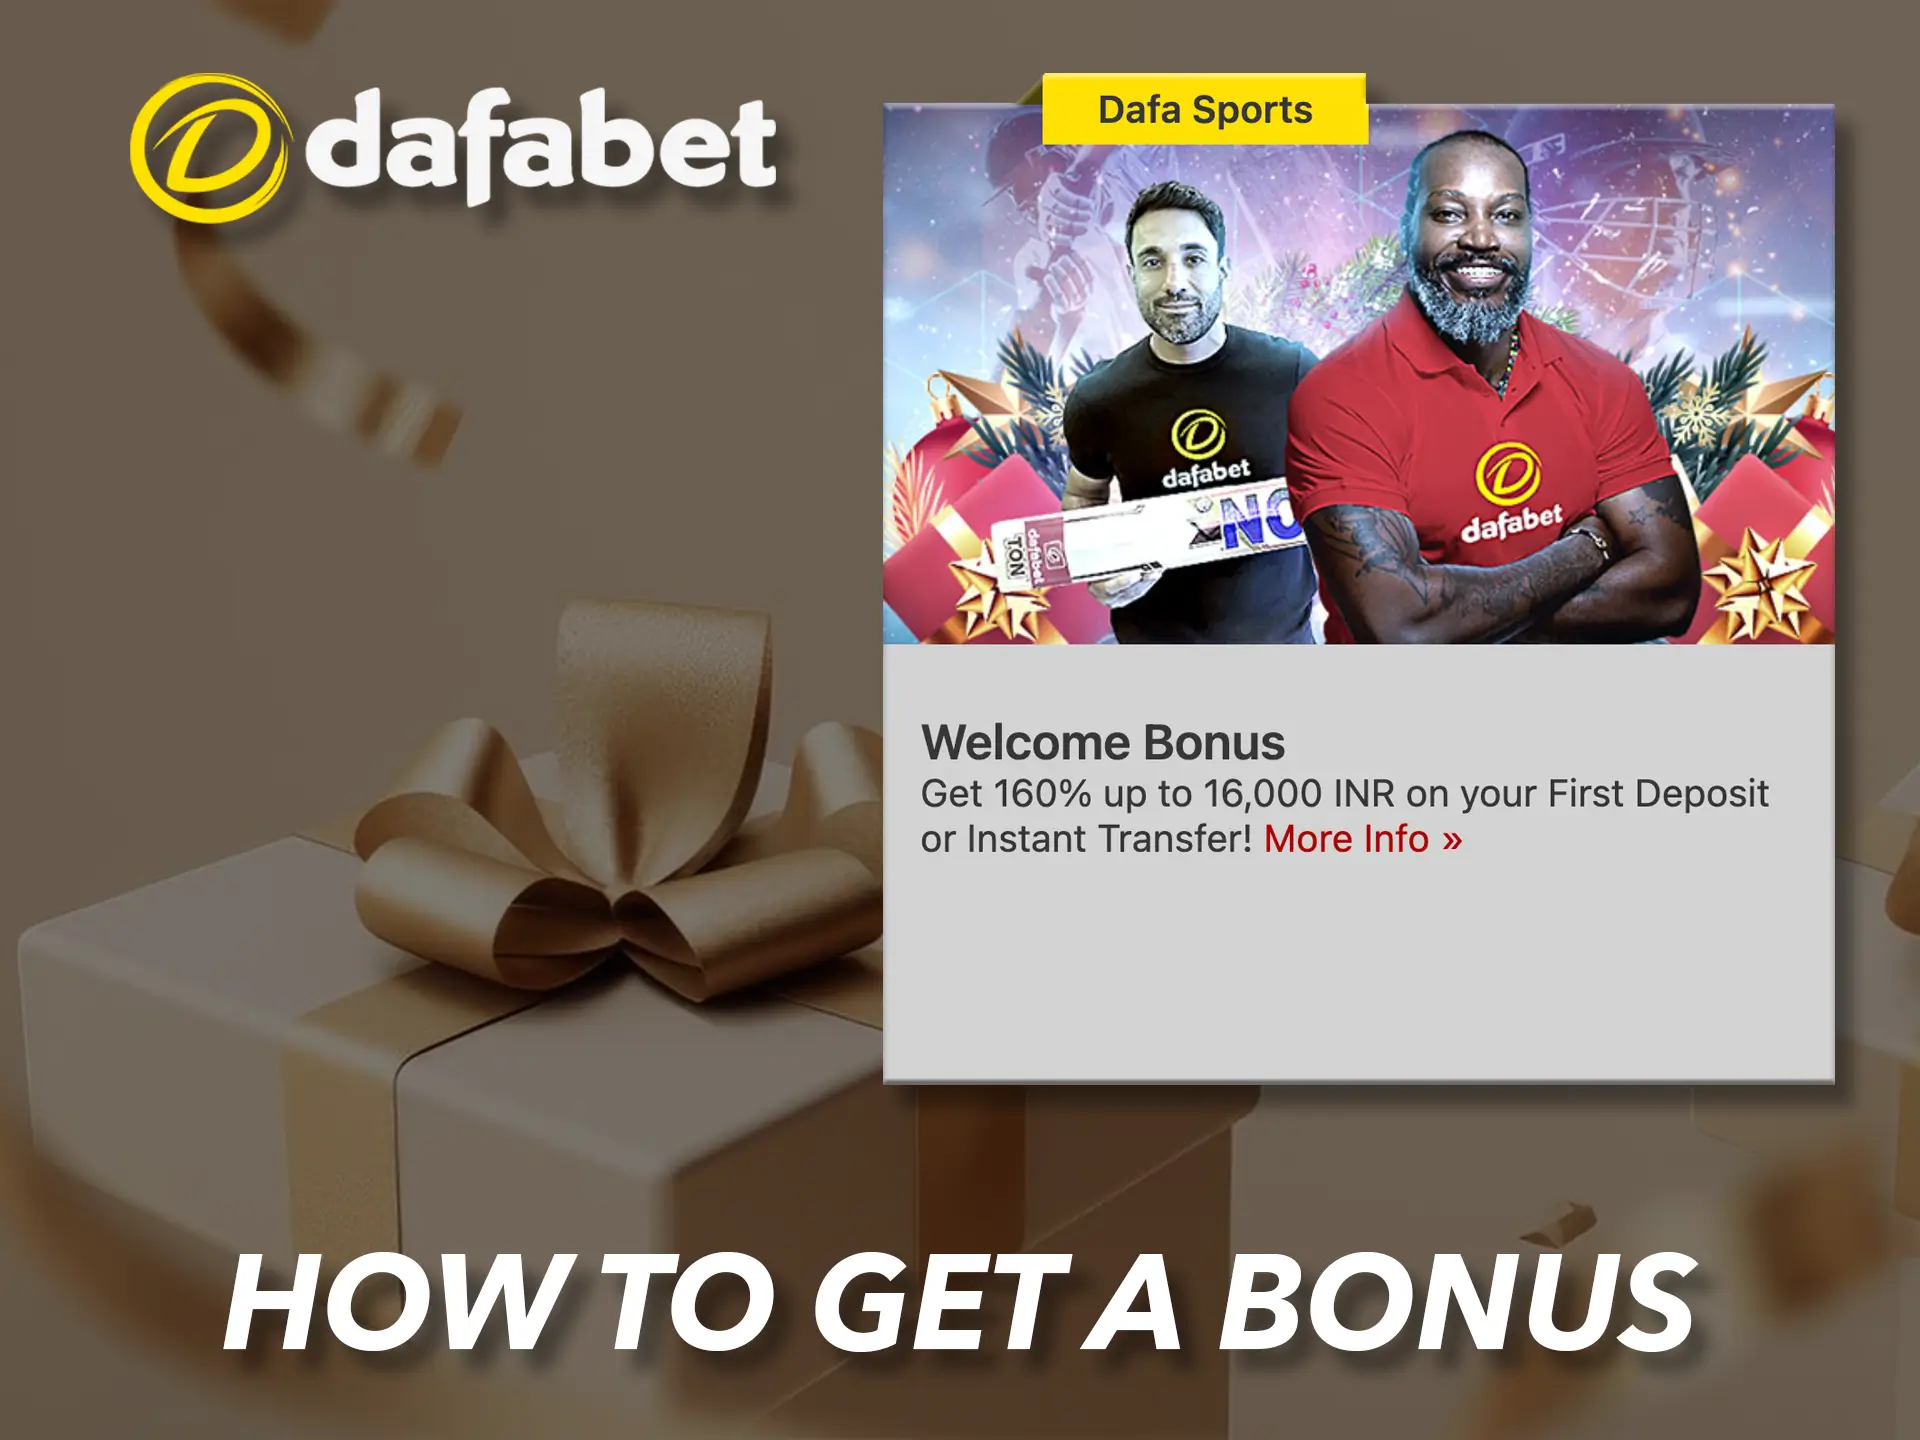 Sign up and get your first and long awaited bonus from Dafabet.